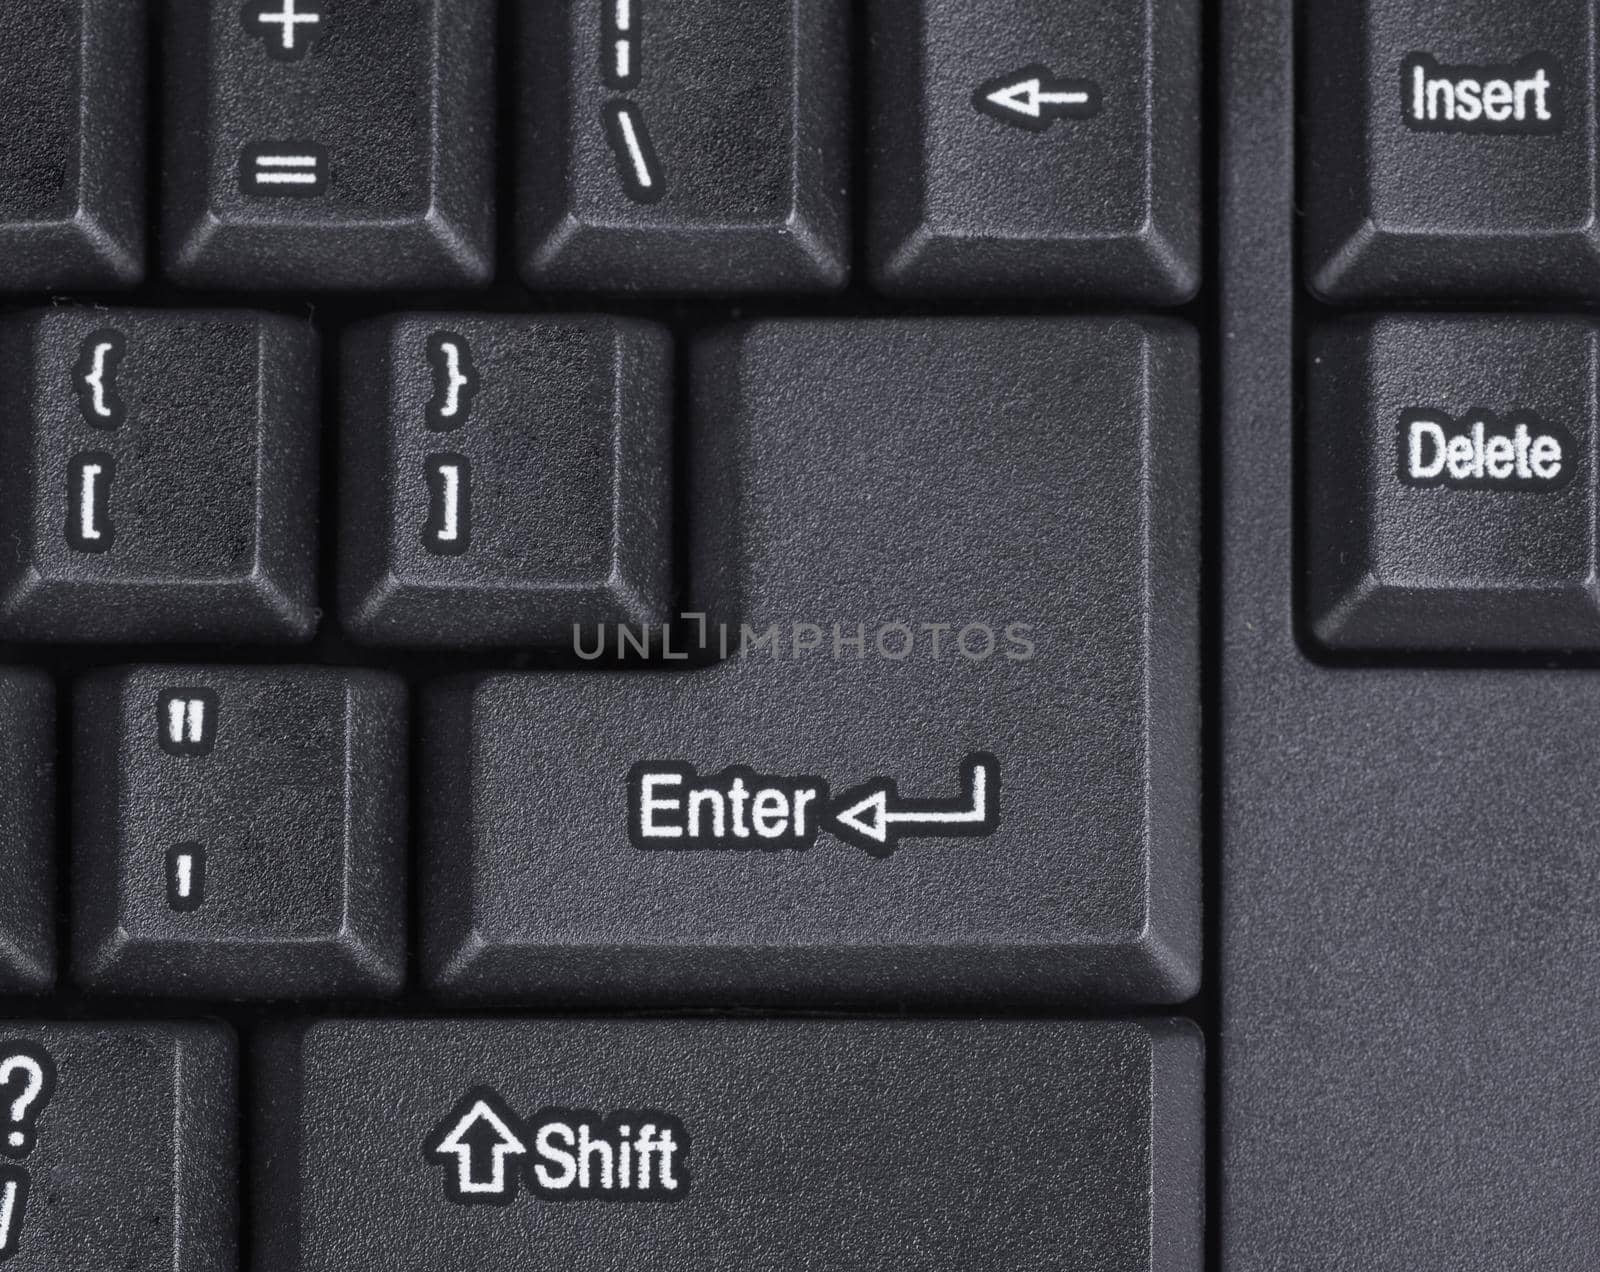 enter button on the keyboard of computer